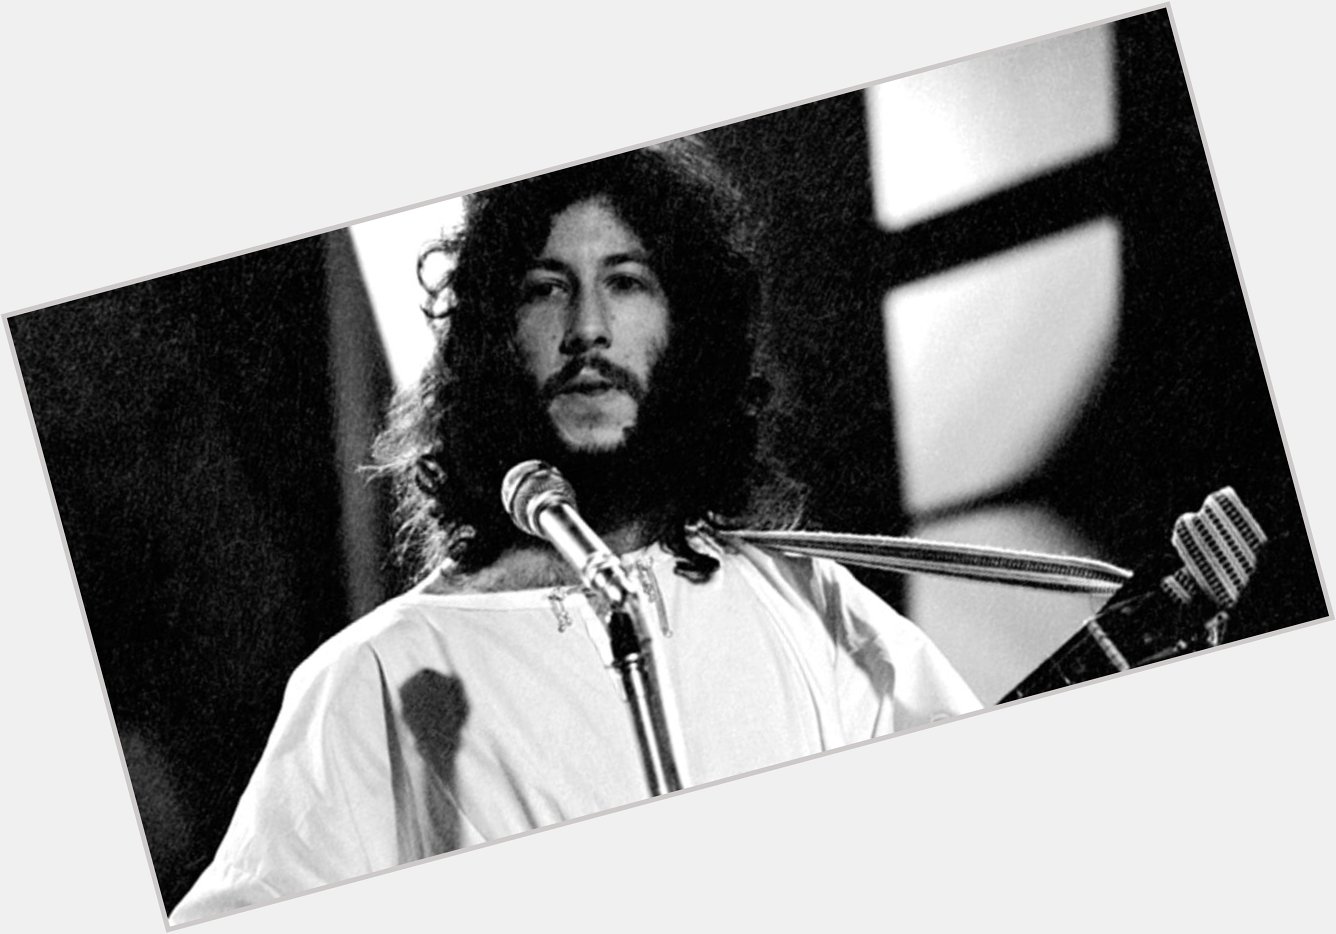 Happy Birthday to Peter Green, founding member of Fleetwood Mac, born this day in 1946 